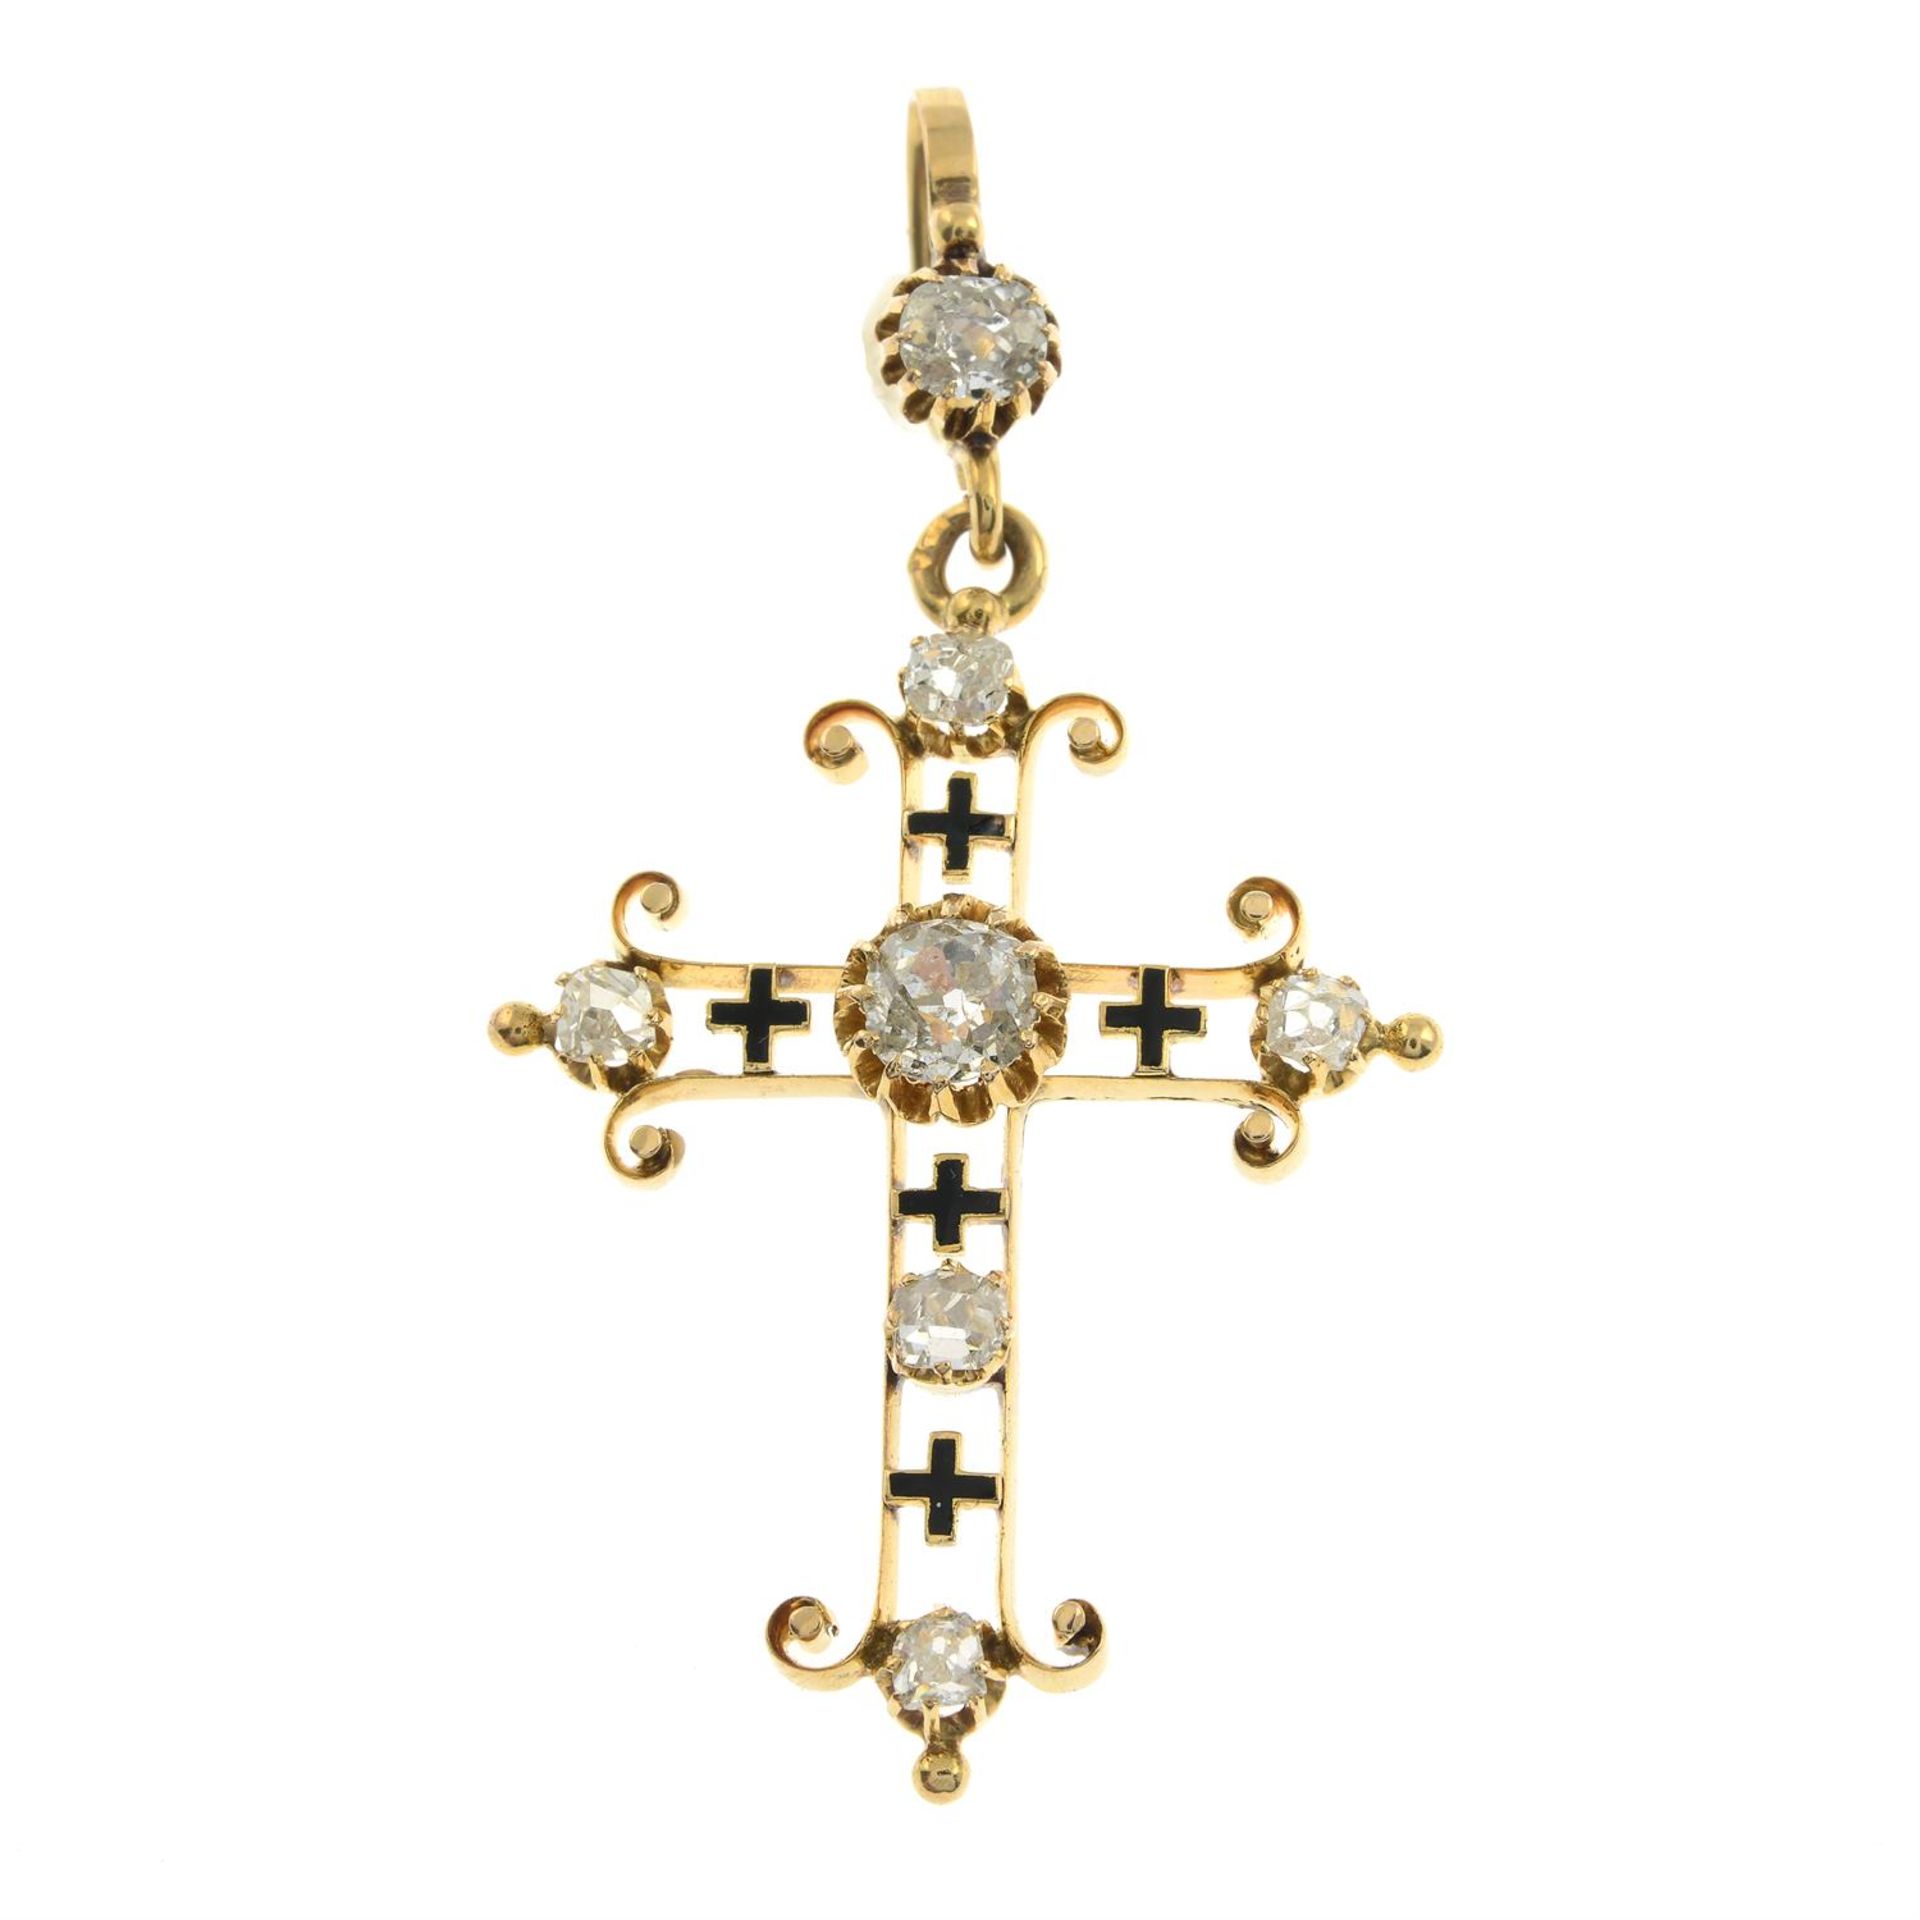 An early 20th century 18ct gold old-cut diamond and black enamel cross pendant. - Image 2 of 4